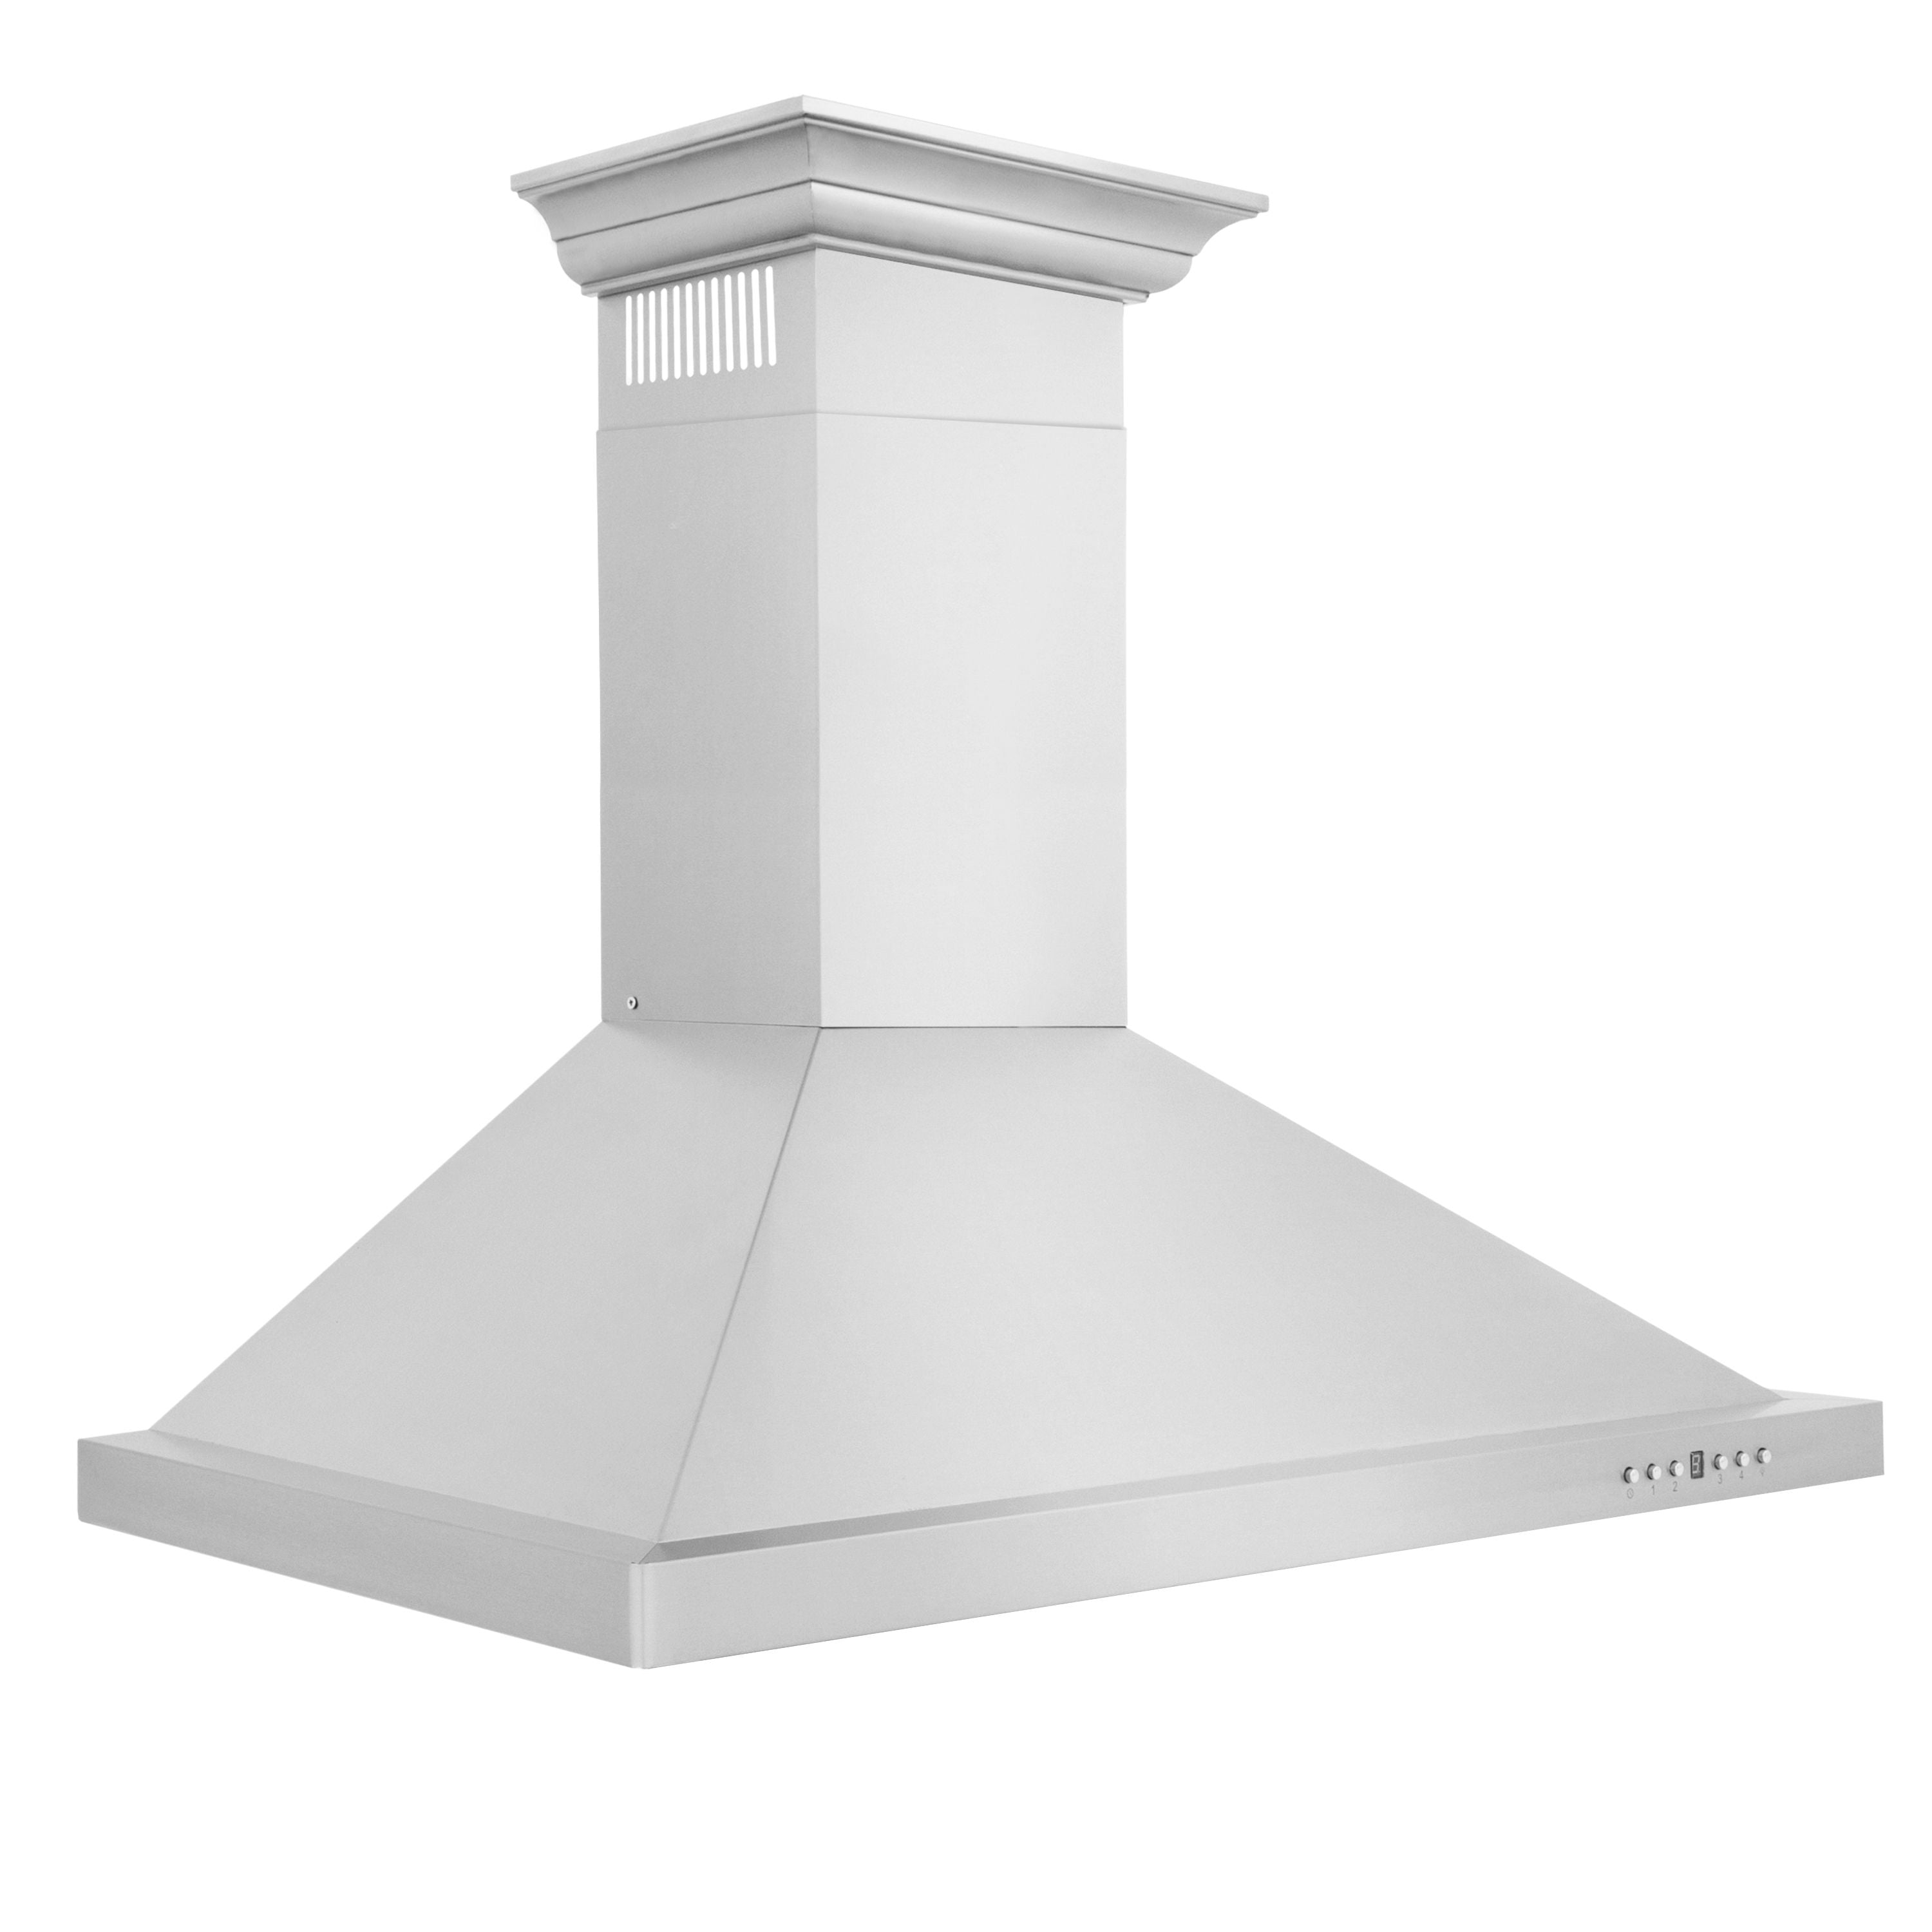 ZLINE 36 in. Convertible Vent Wall Mount Range Hood in Stainless Steel with Crown Molding, KBCRN-36